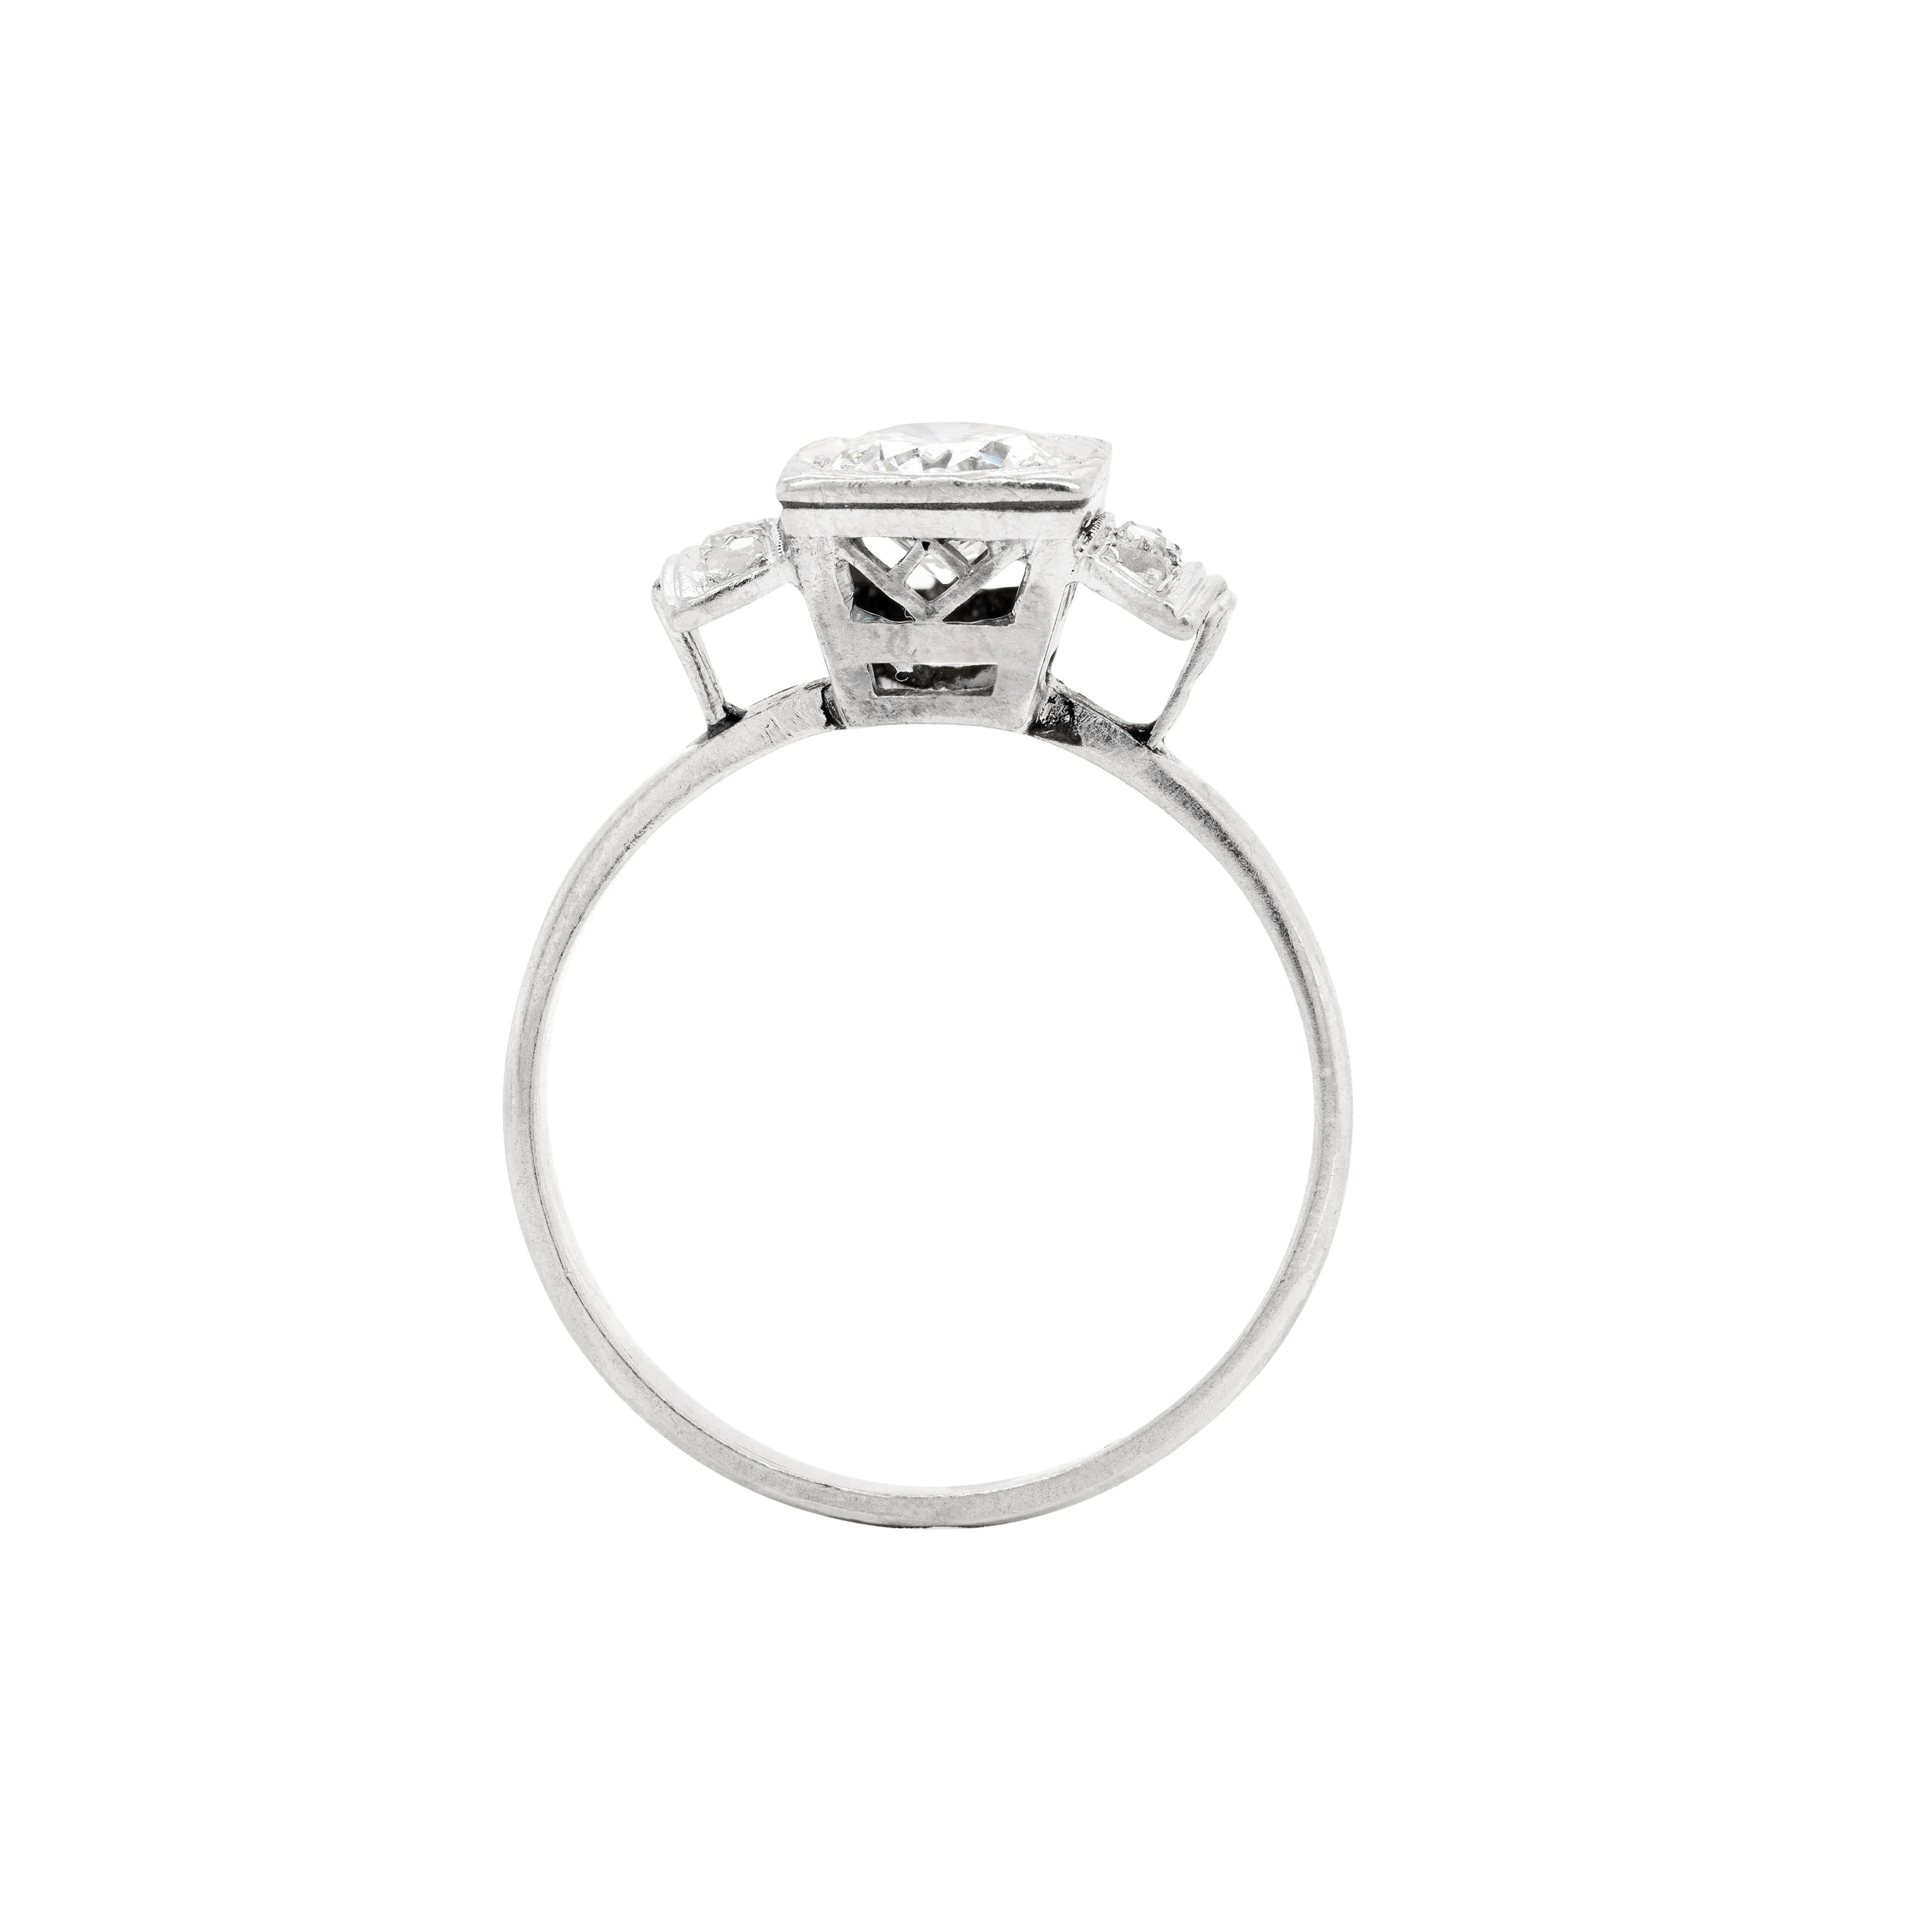 This wonderful Vintage engagement ring features a beautiful transitional cut diamond grain set into a hexagonal bezel within a high square box mount. The piece is further designed with diamond set step shoulders that lead past an open work gallery